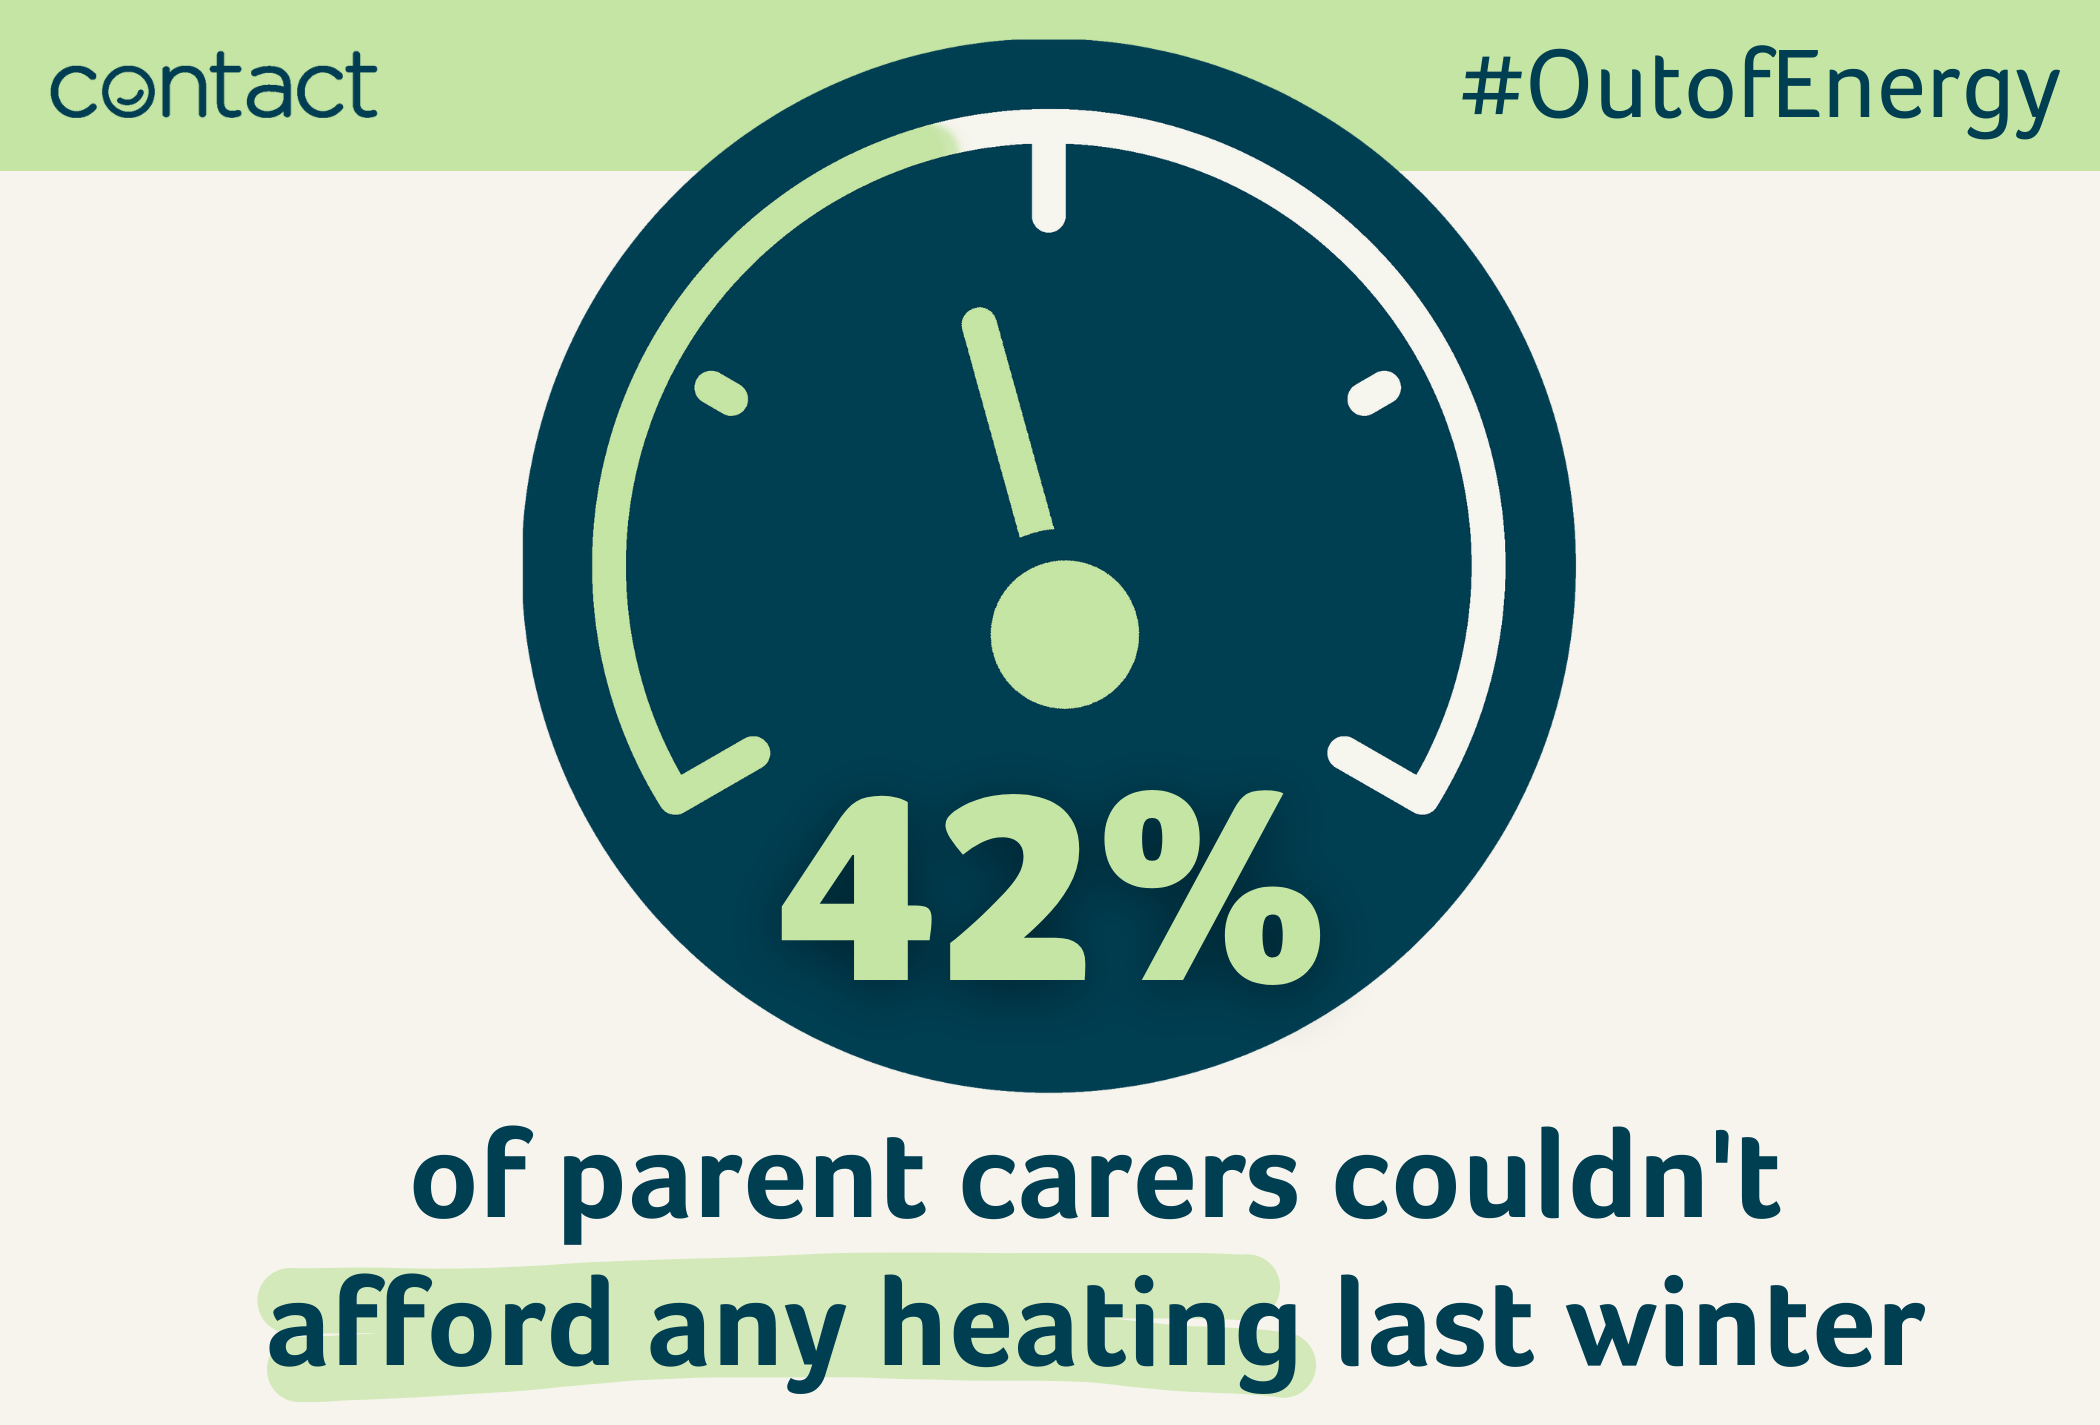 42% of parent carers couldn't afford any heating last winter